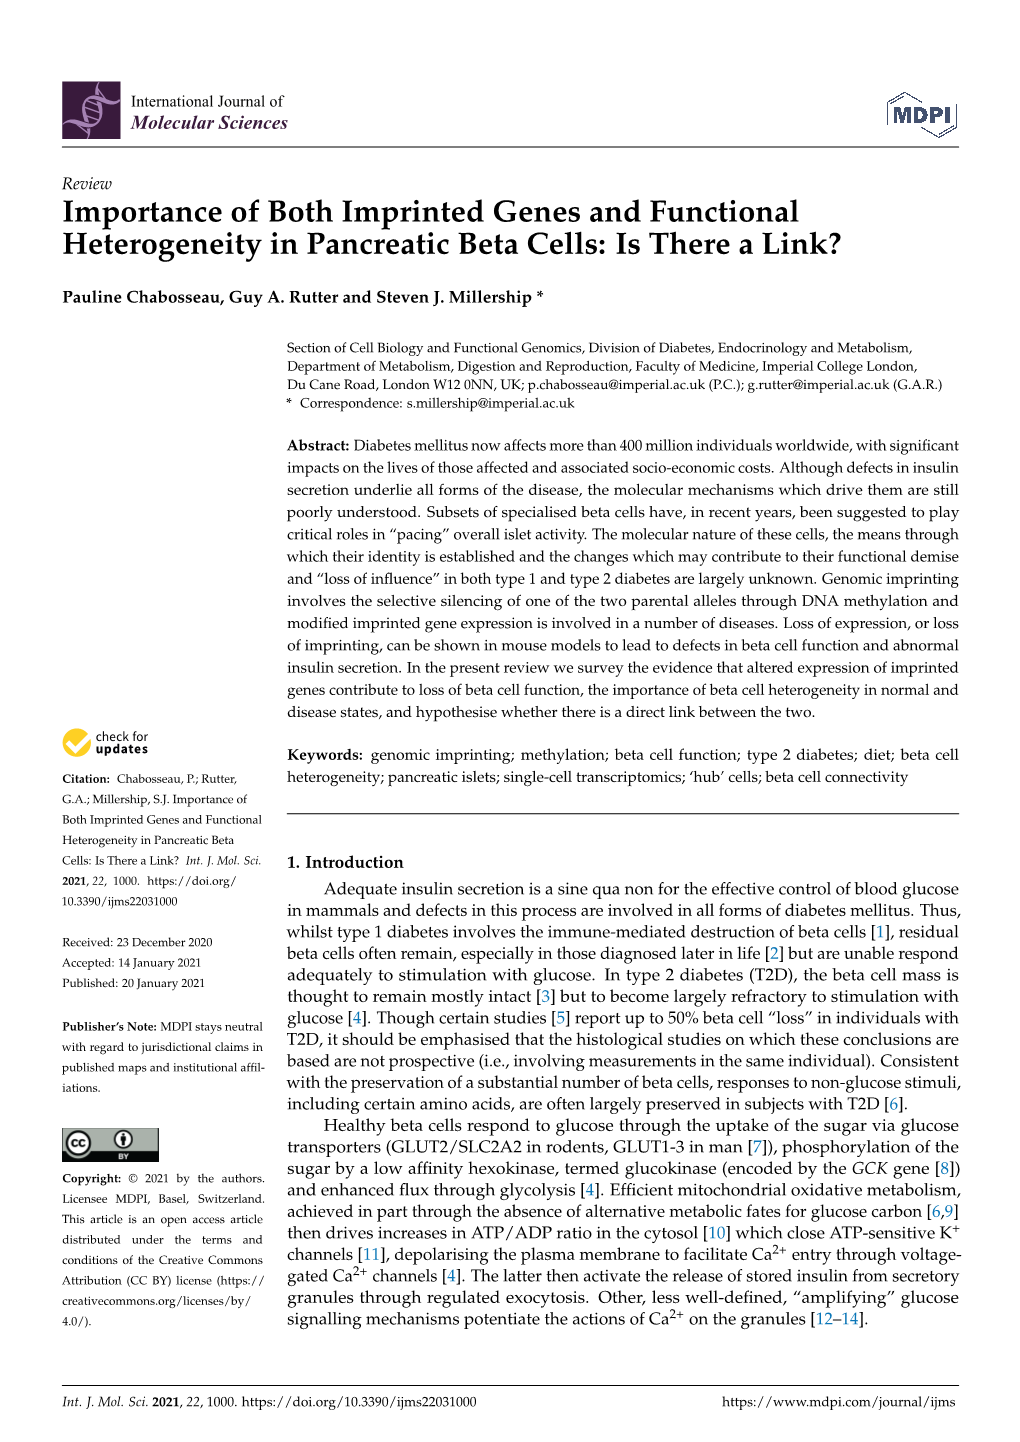 Importance of Both Imprinted Genes and Functional Heterogeneity in Pancreatic Beta Cells: Is There a Link?